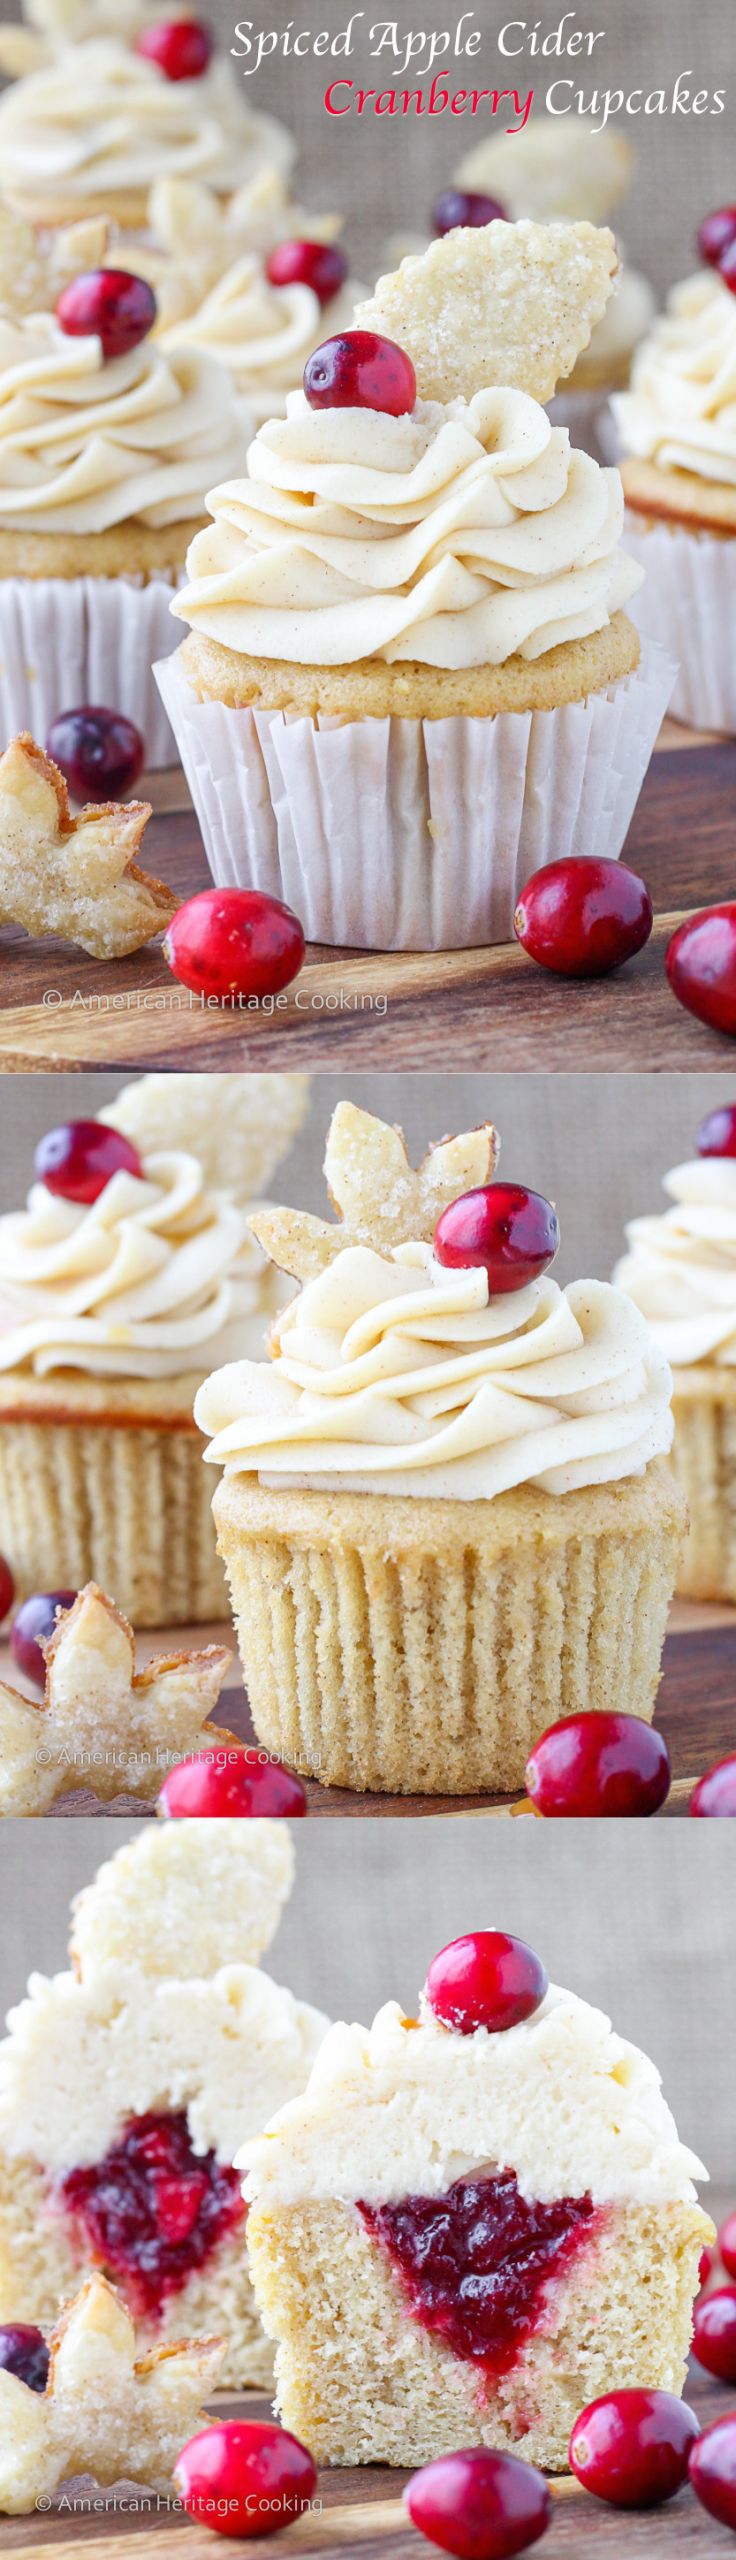 Apple Cider Cupcakes
 Spiced Apple Cider Cranberry Cupcakes